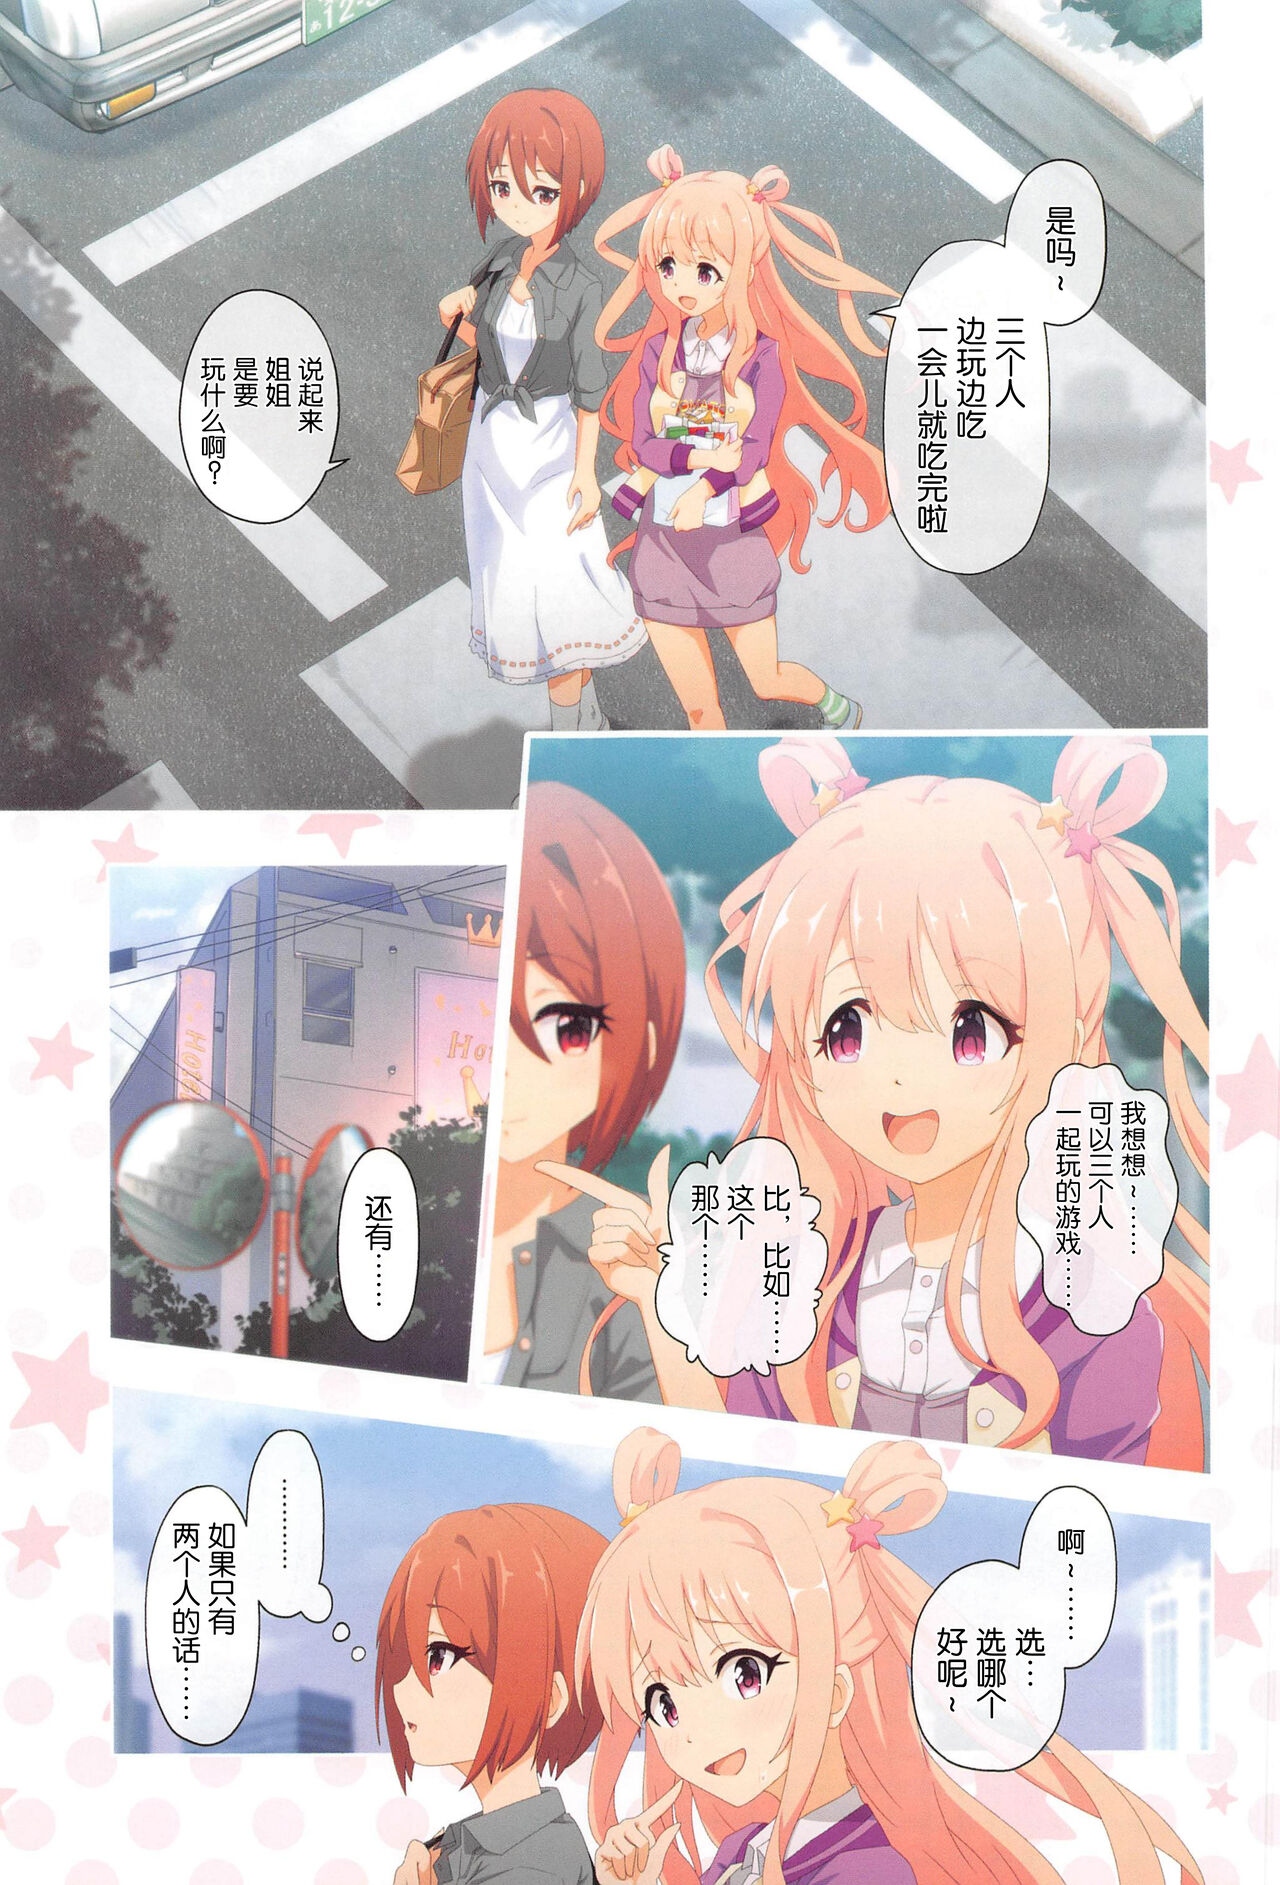 (COMIC1 BS-sai Special) [MIDDLY (Midorinocha)] Colorful Connect 5th:Dive (Princess Connect! Re:Dive) [Chinese] [黎欧x苍蓝星汉化组] (COMIC1 BS祭 スペシャル) [MIDDLY (みどりのちや)] カラフルコネクト 5th:Dive (プリンセスコネクト!Re:Dive) [中国翻訳]